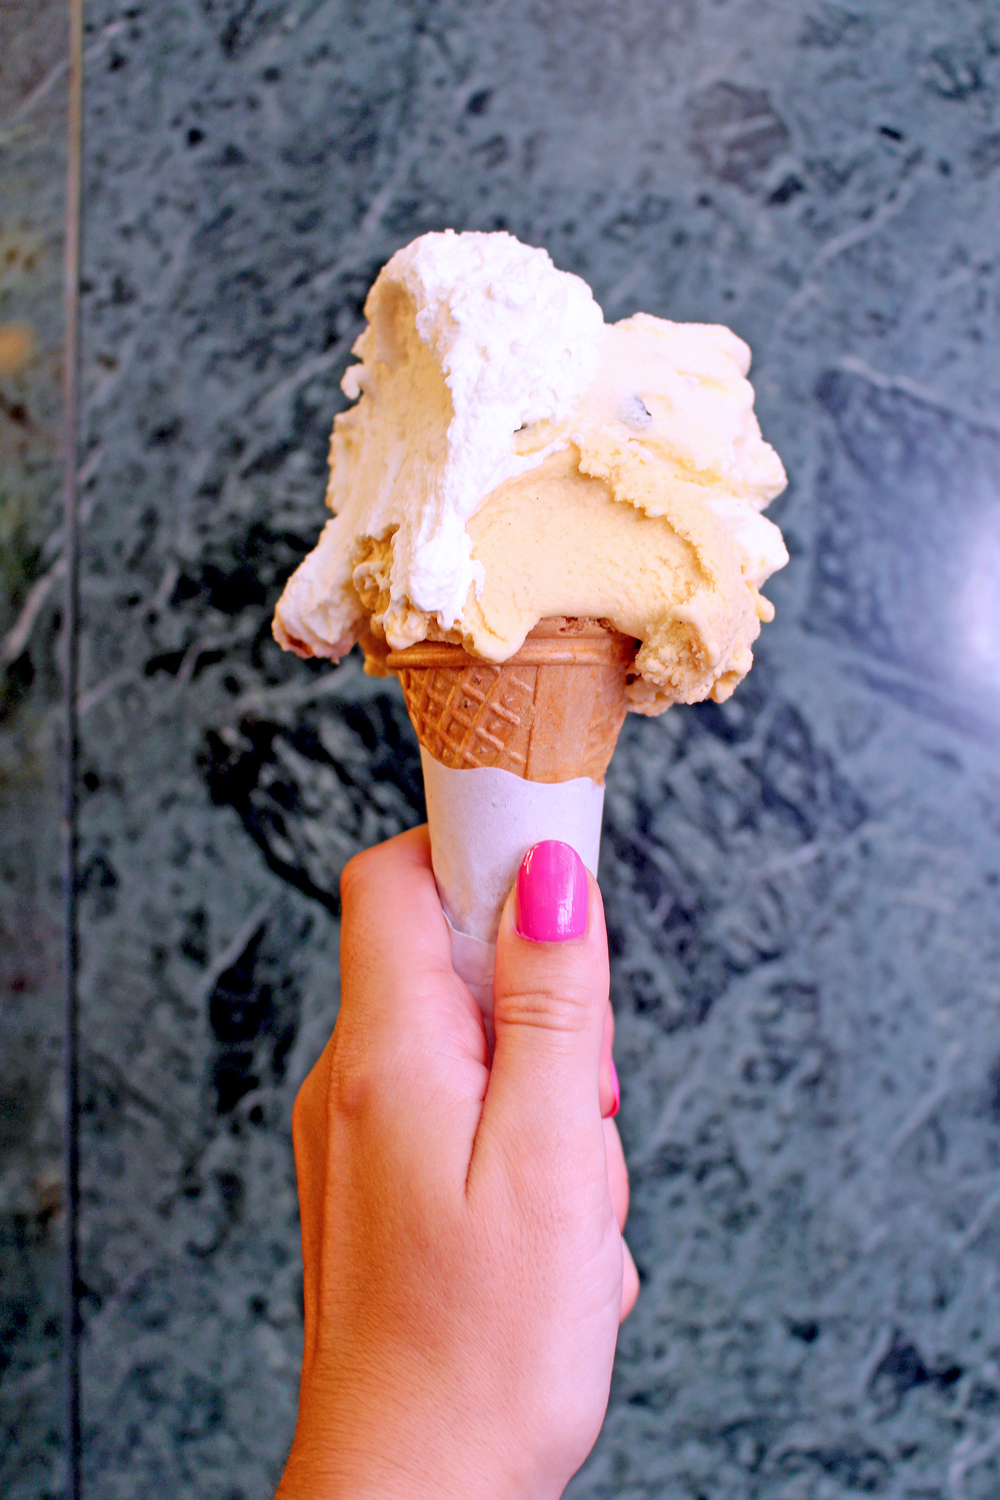 Gelato at the iconic Gelateria Giolitti, Rome - style & travel blog